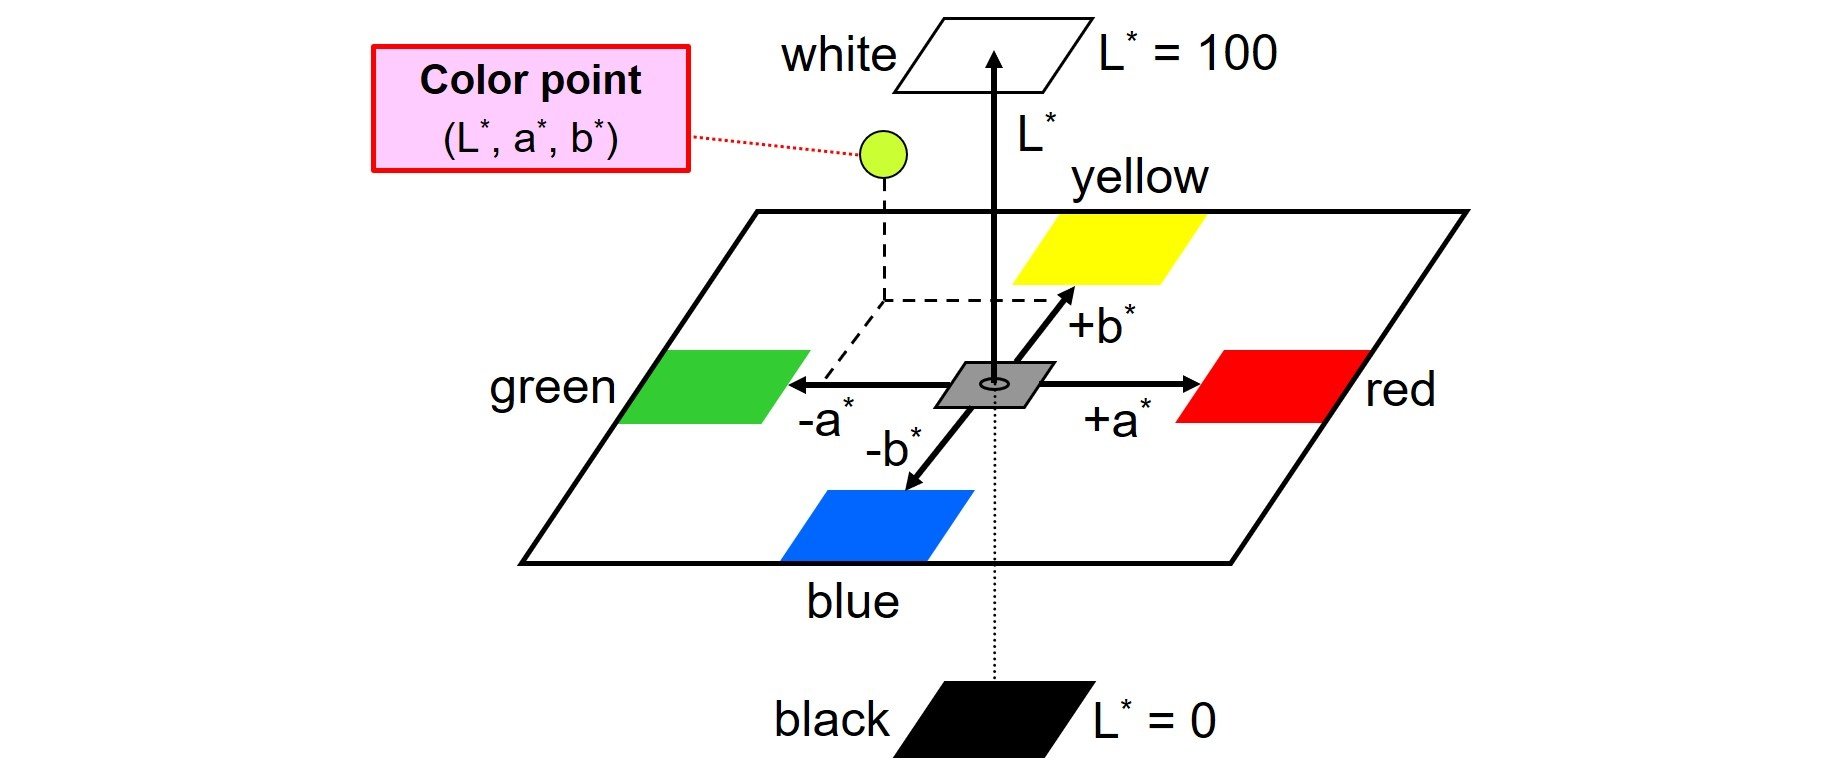 Depiction of The 3-dimensional CIELAB color space - Learn more about The CIELAB L*a*b* System – the Method to Quantify Colors of Coatings